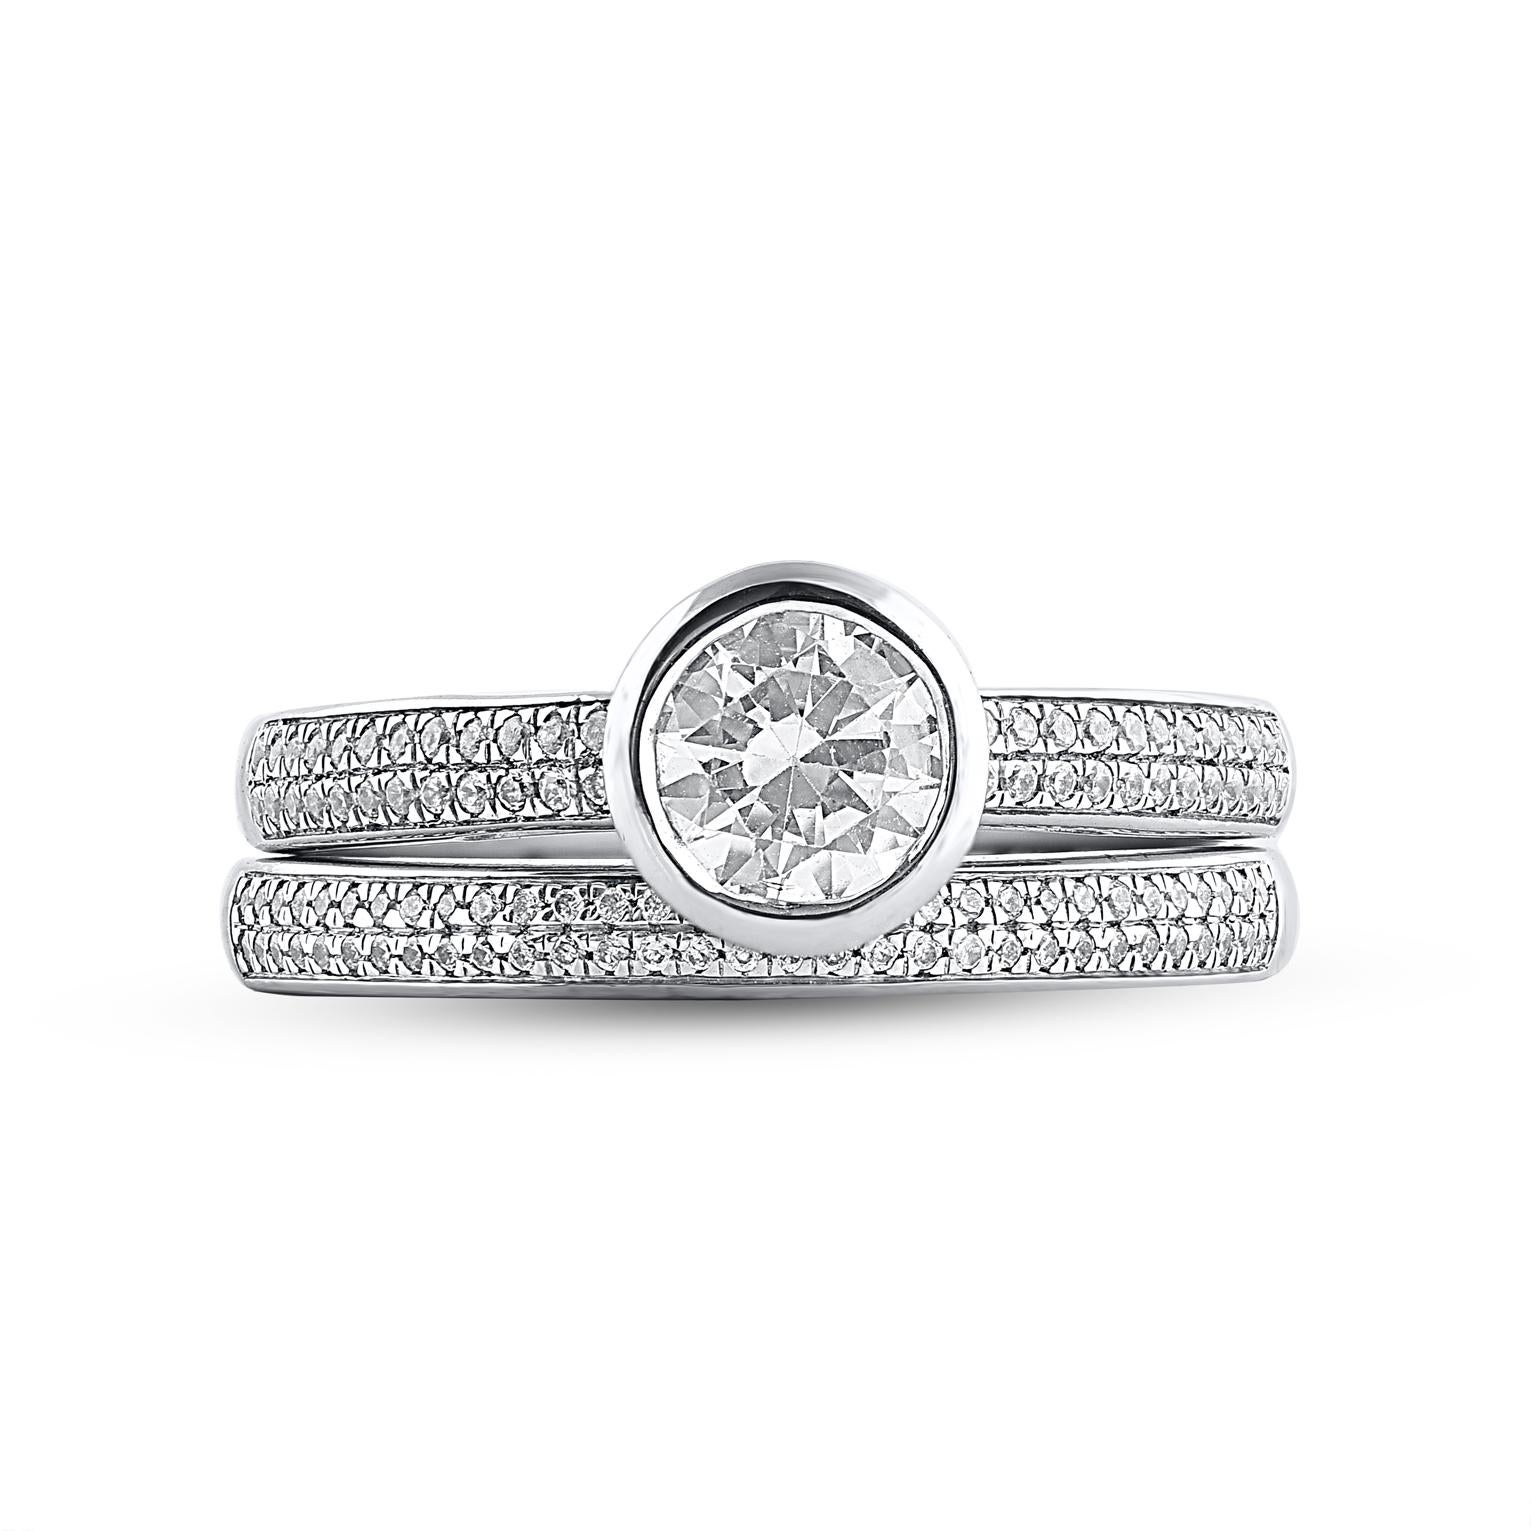 On that special day, express all your love with this classic and dazzling diamond bridal set. Crafted in 14 Karat white gold. This wedding ring features a sparkling 109 brilliant cut and single cut round diamonds beautifully set in prong & pave